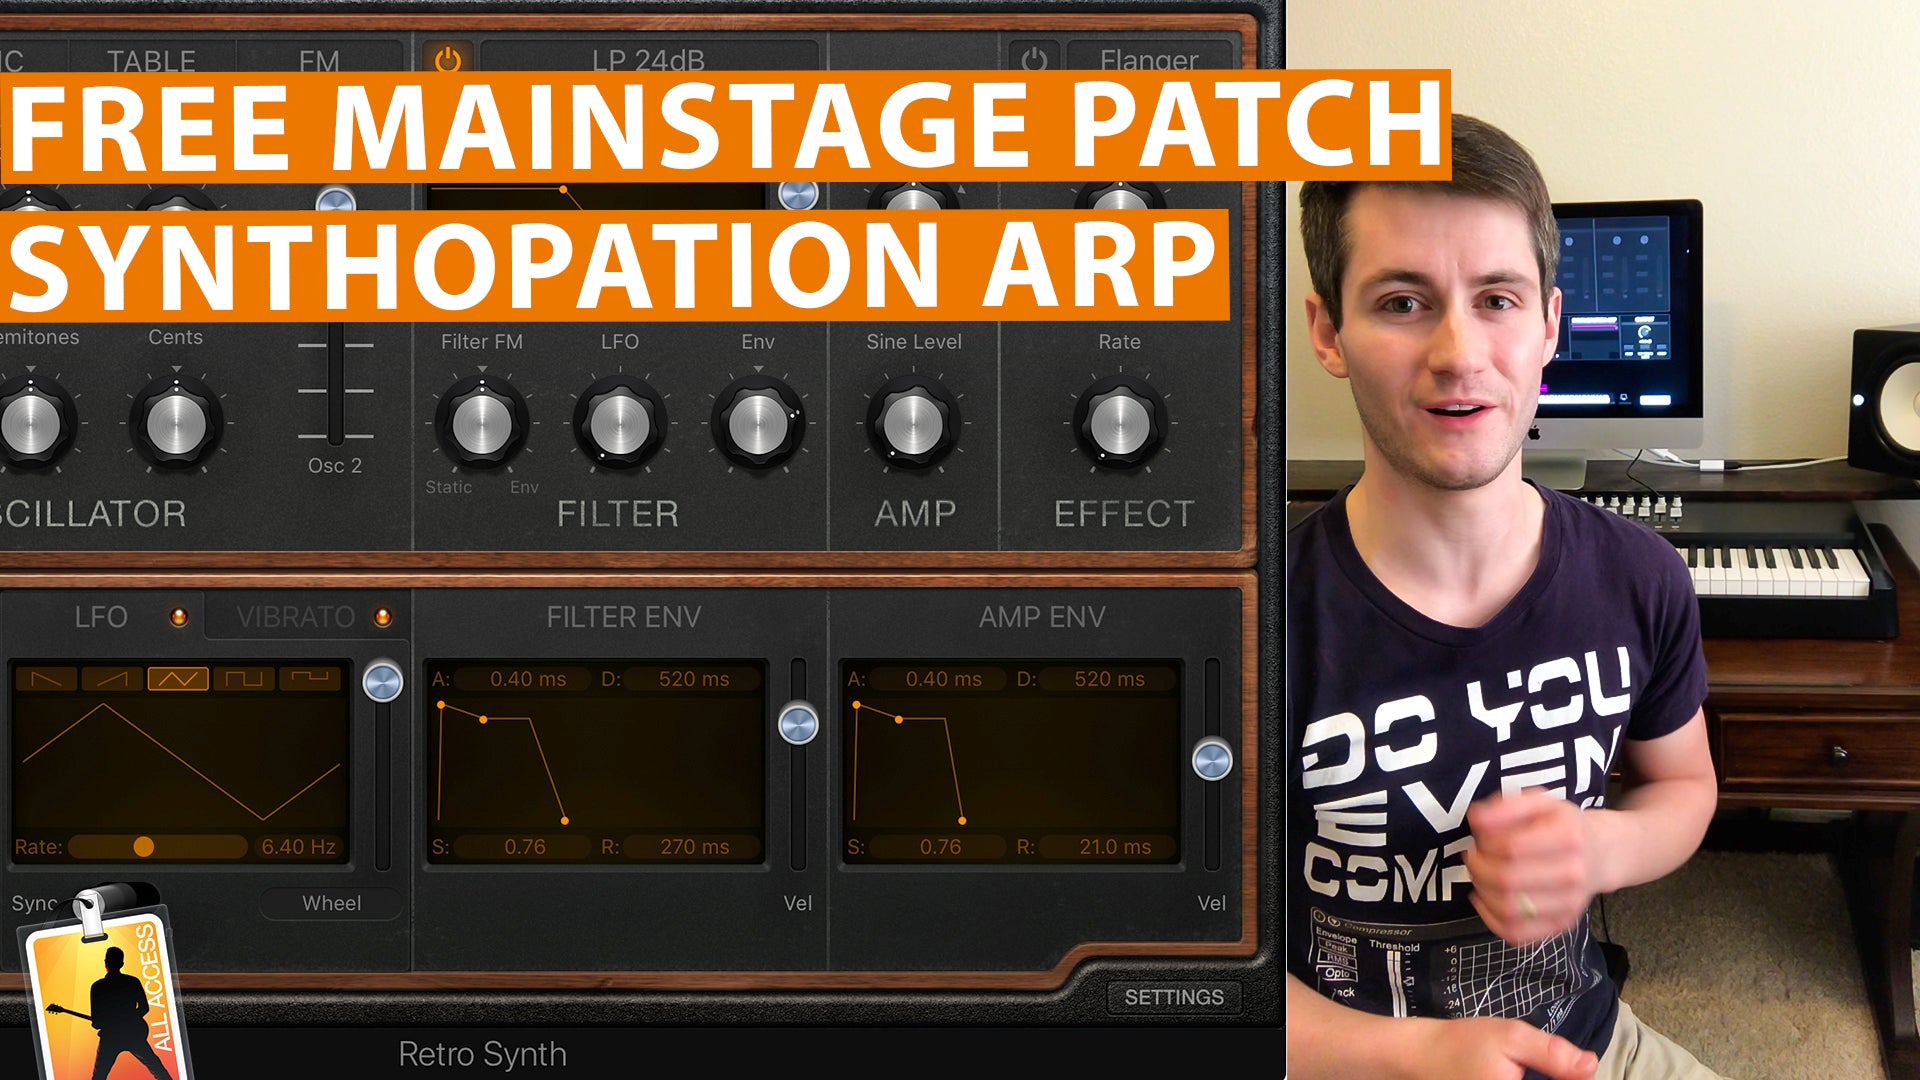 Free MainStage Worship Patch! - Synthopation Arp